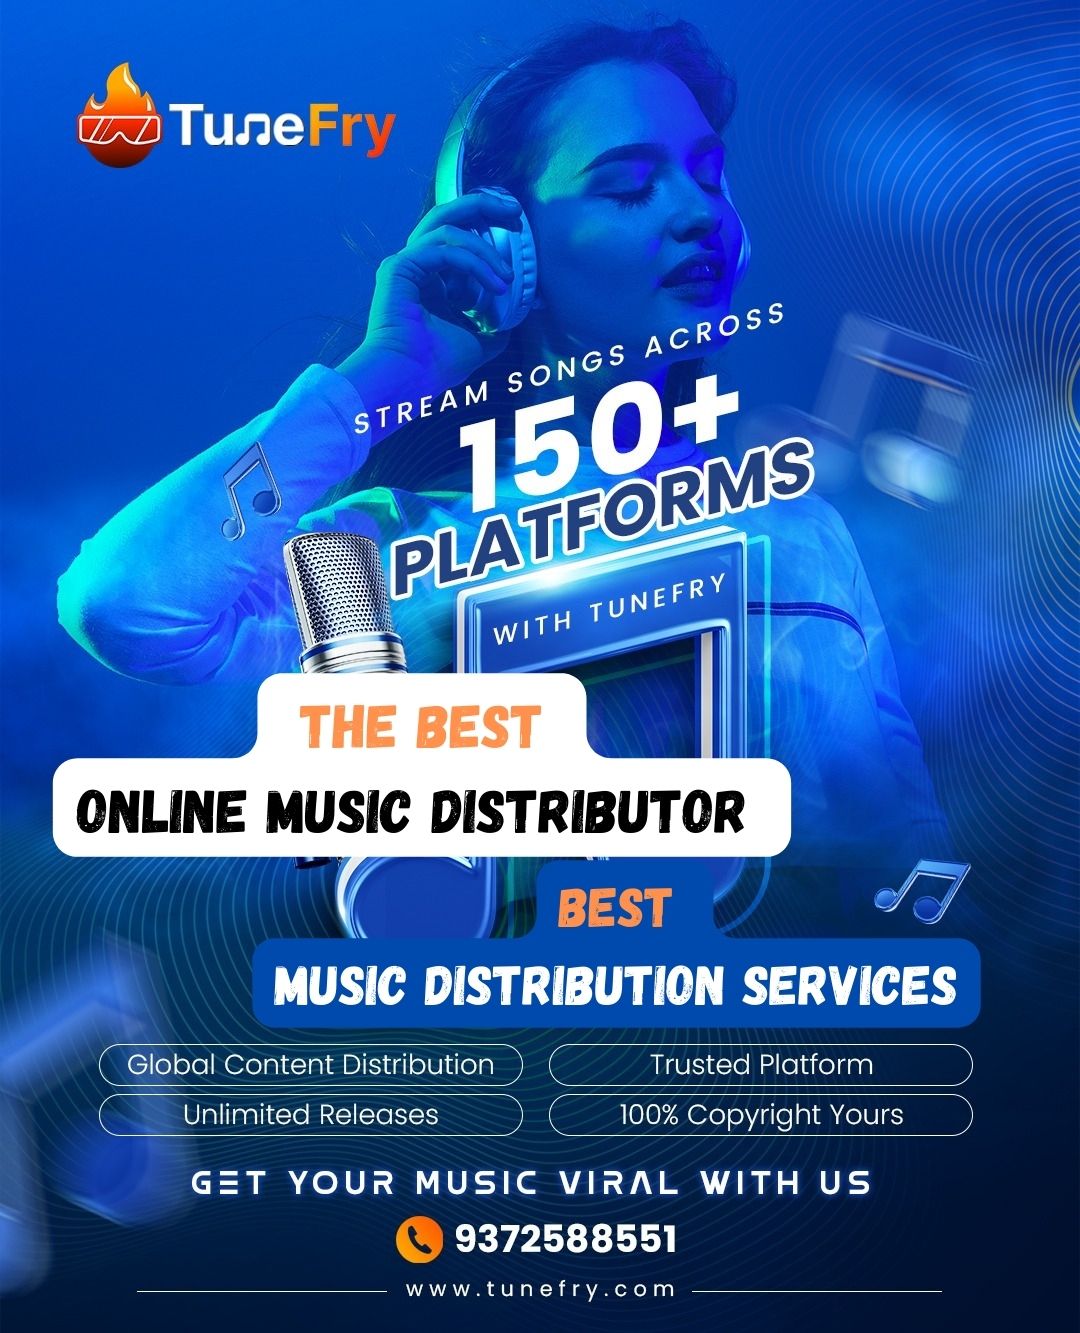 Introducing Tunefry The Best Online Music Distributor and Distribution Services